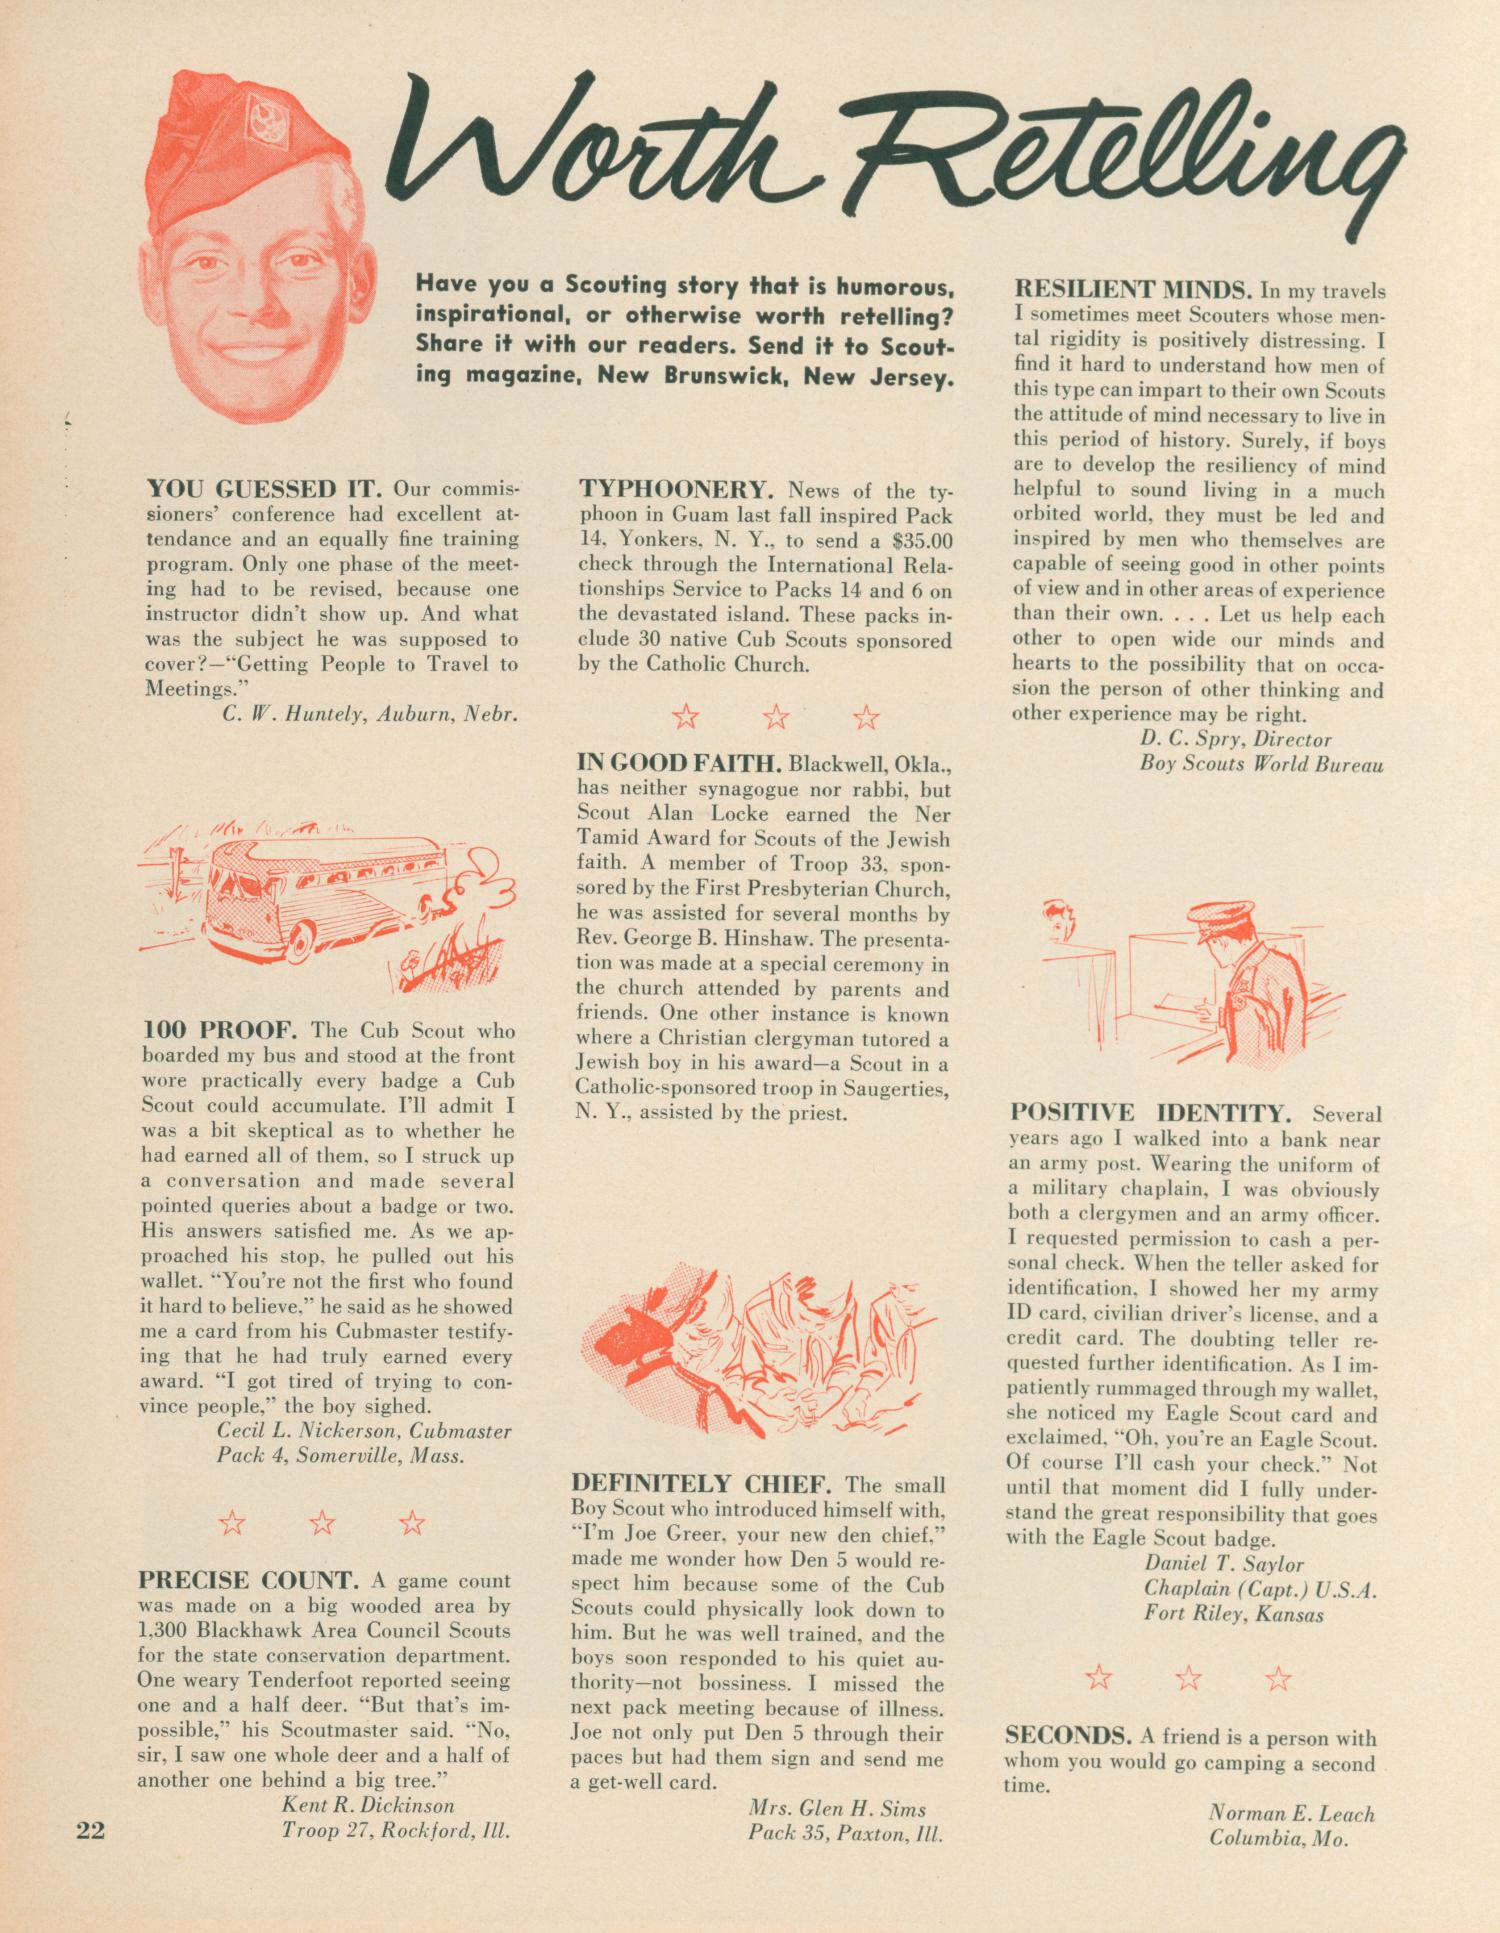 Scouting, Volume 51, Number 3, March 1963
                                                
                                                    22
                                                